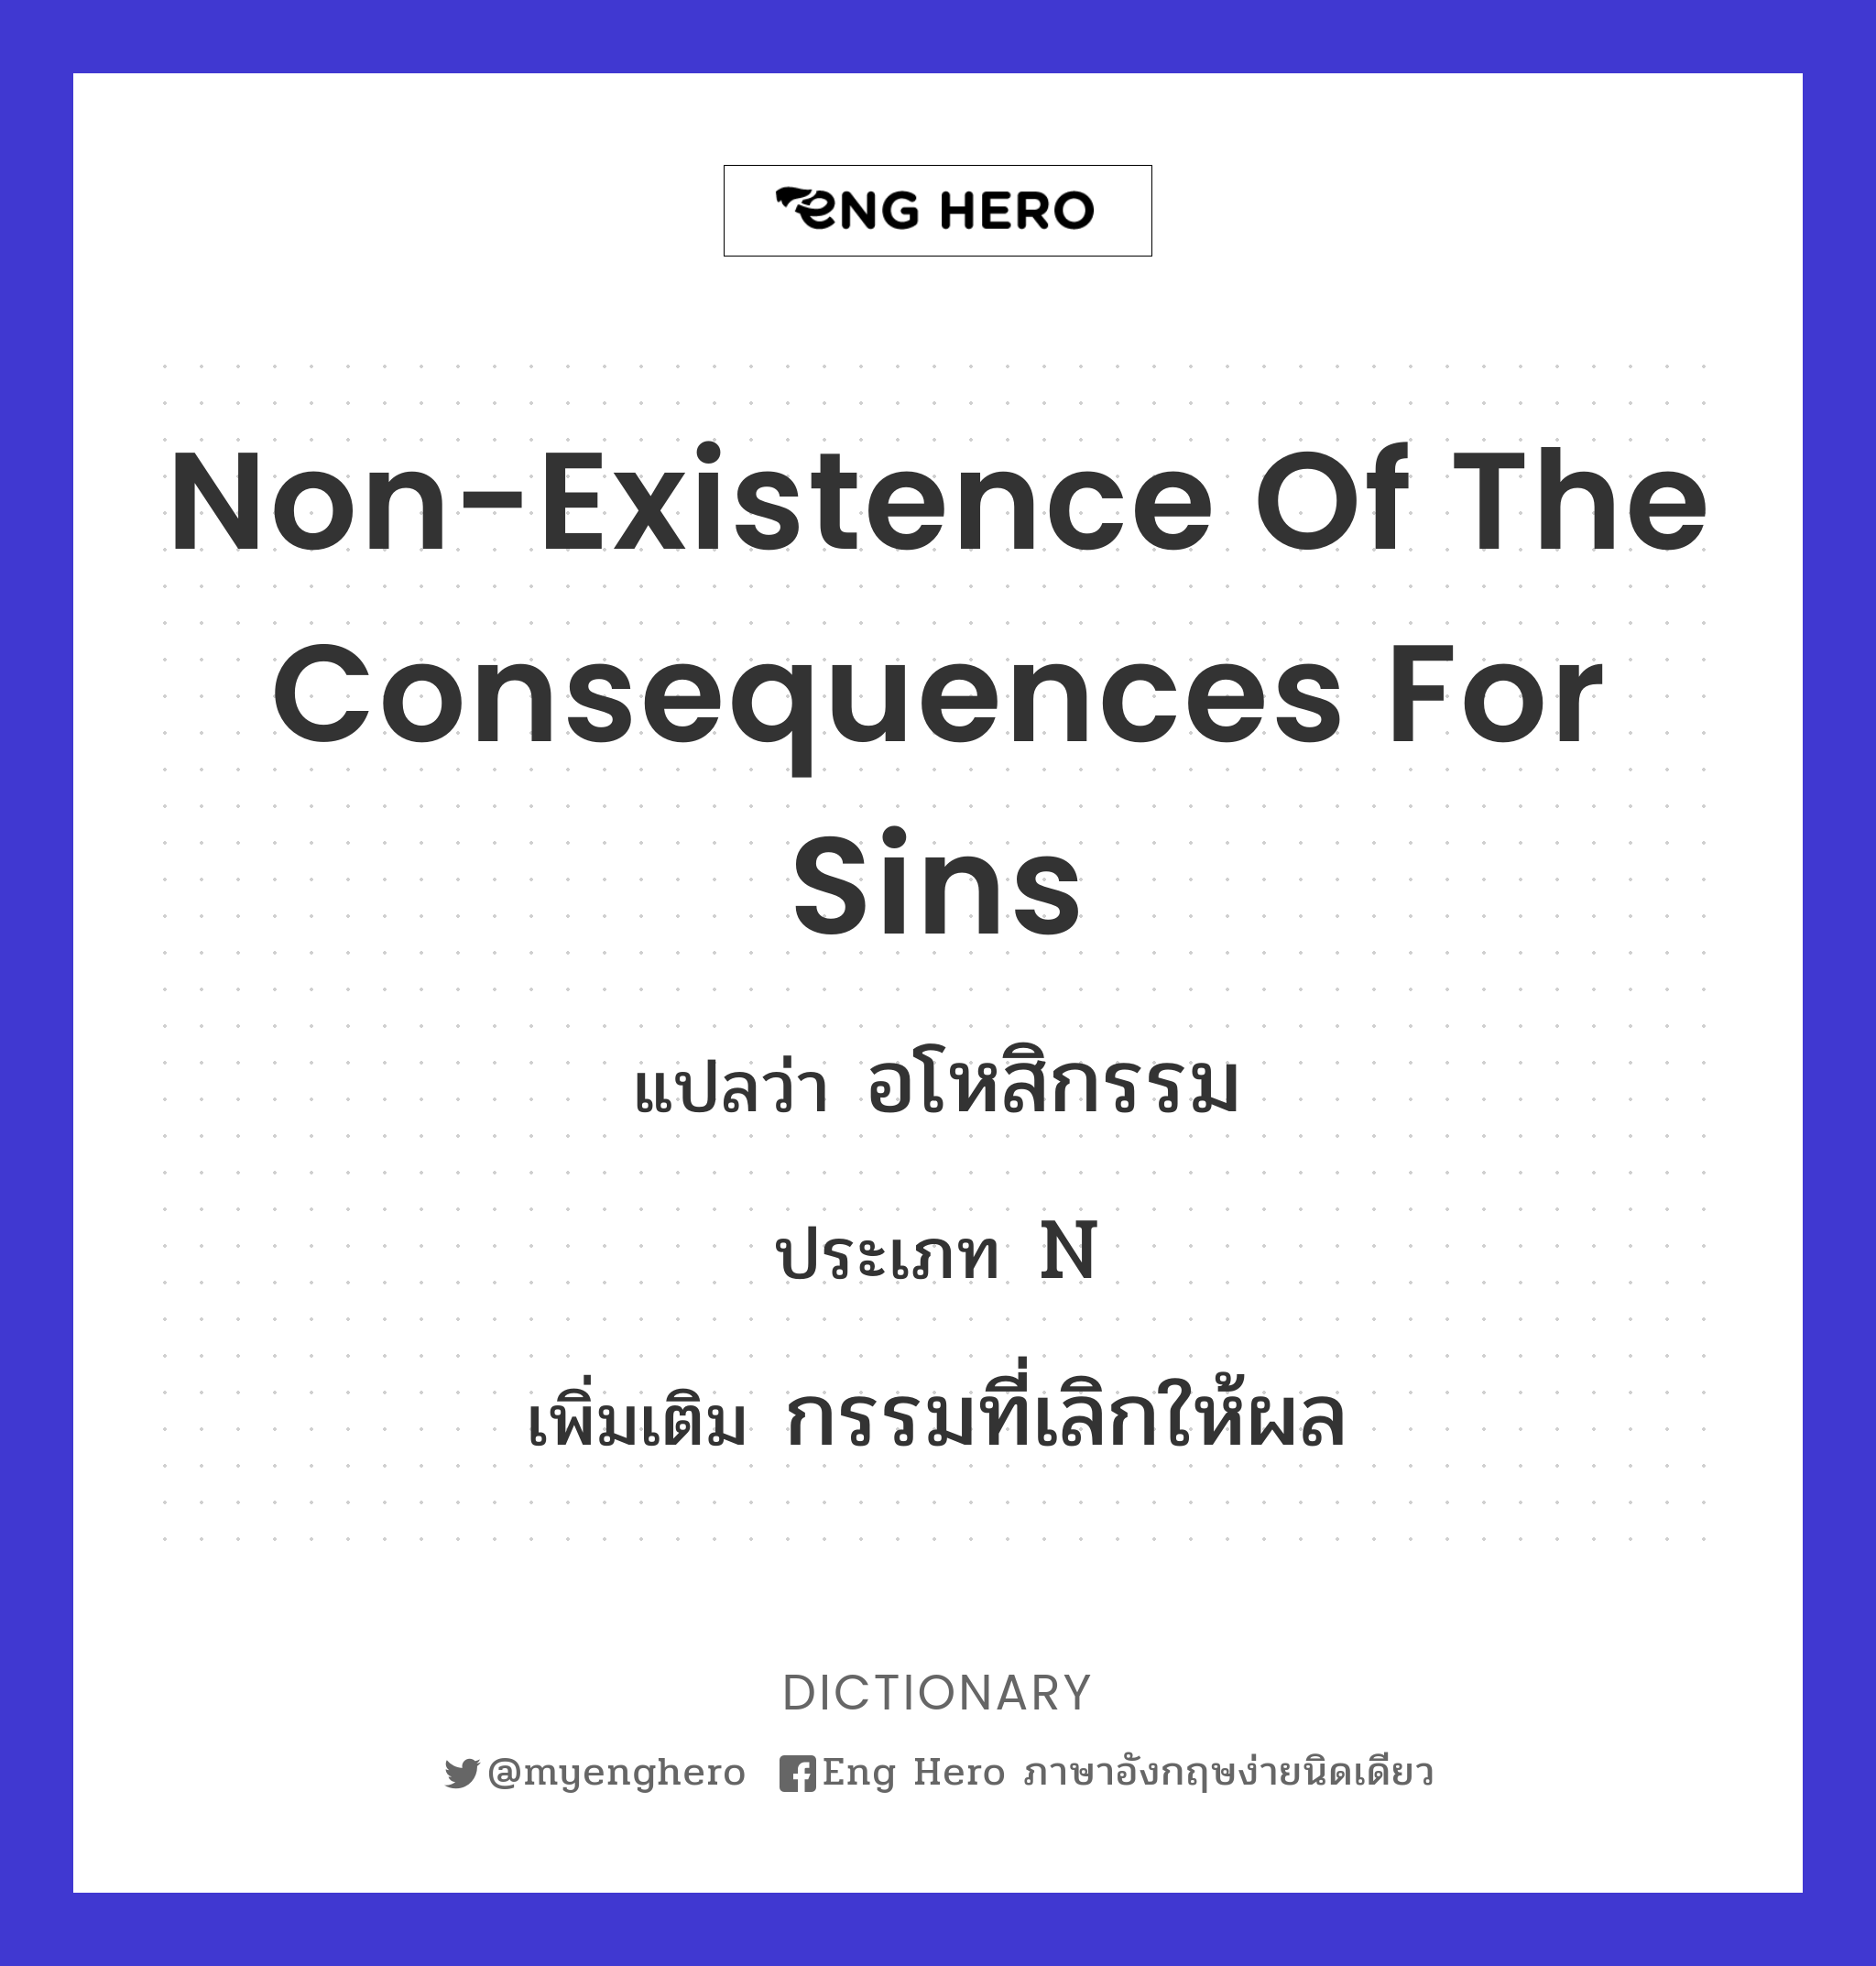 non-existence of the consequences for sins